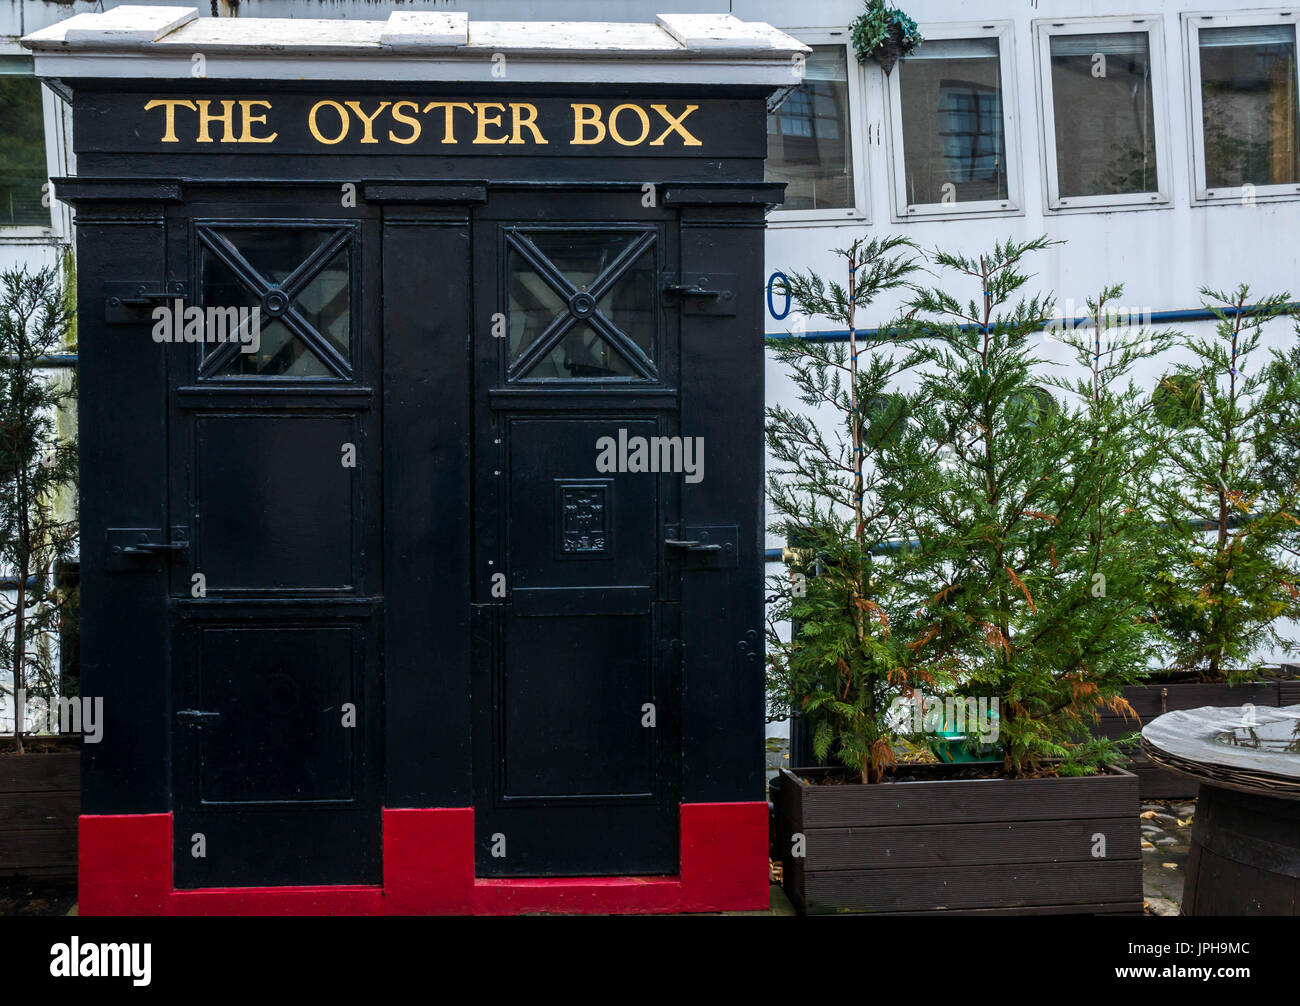 Old fashioned police telephone call box converted to food takeway stand called The Oyster Box, The Shore, Leith, Edinburgh, Scotland, UK Stock Photo